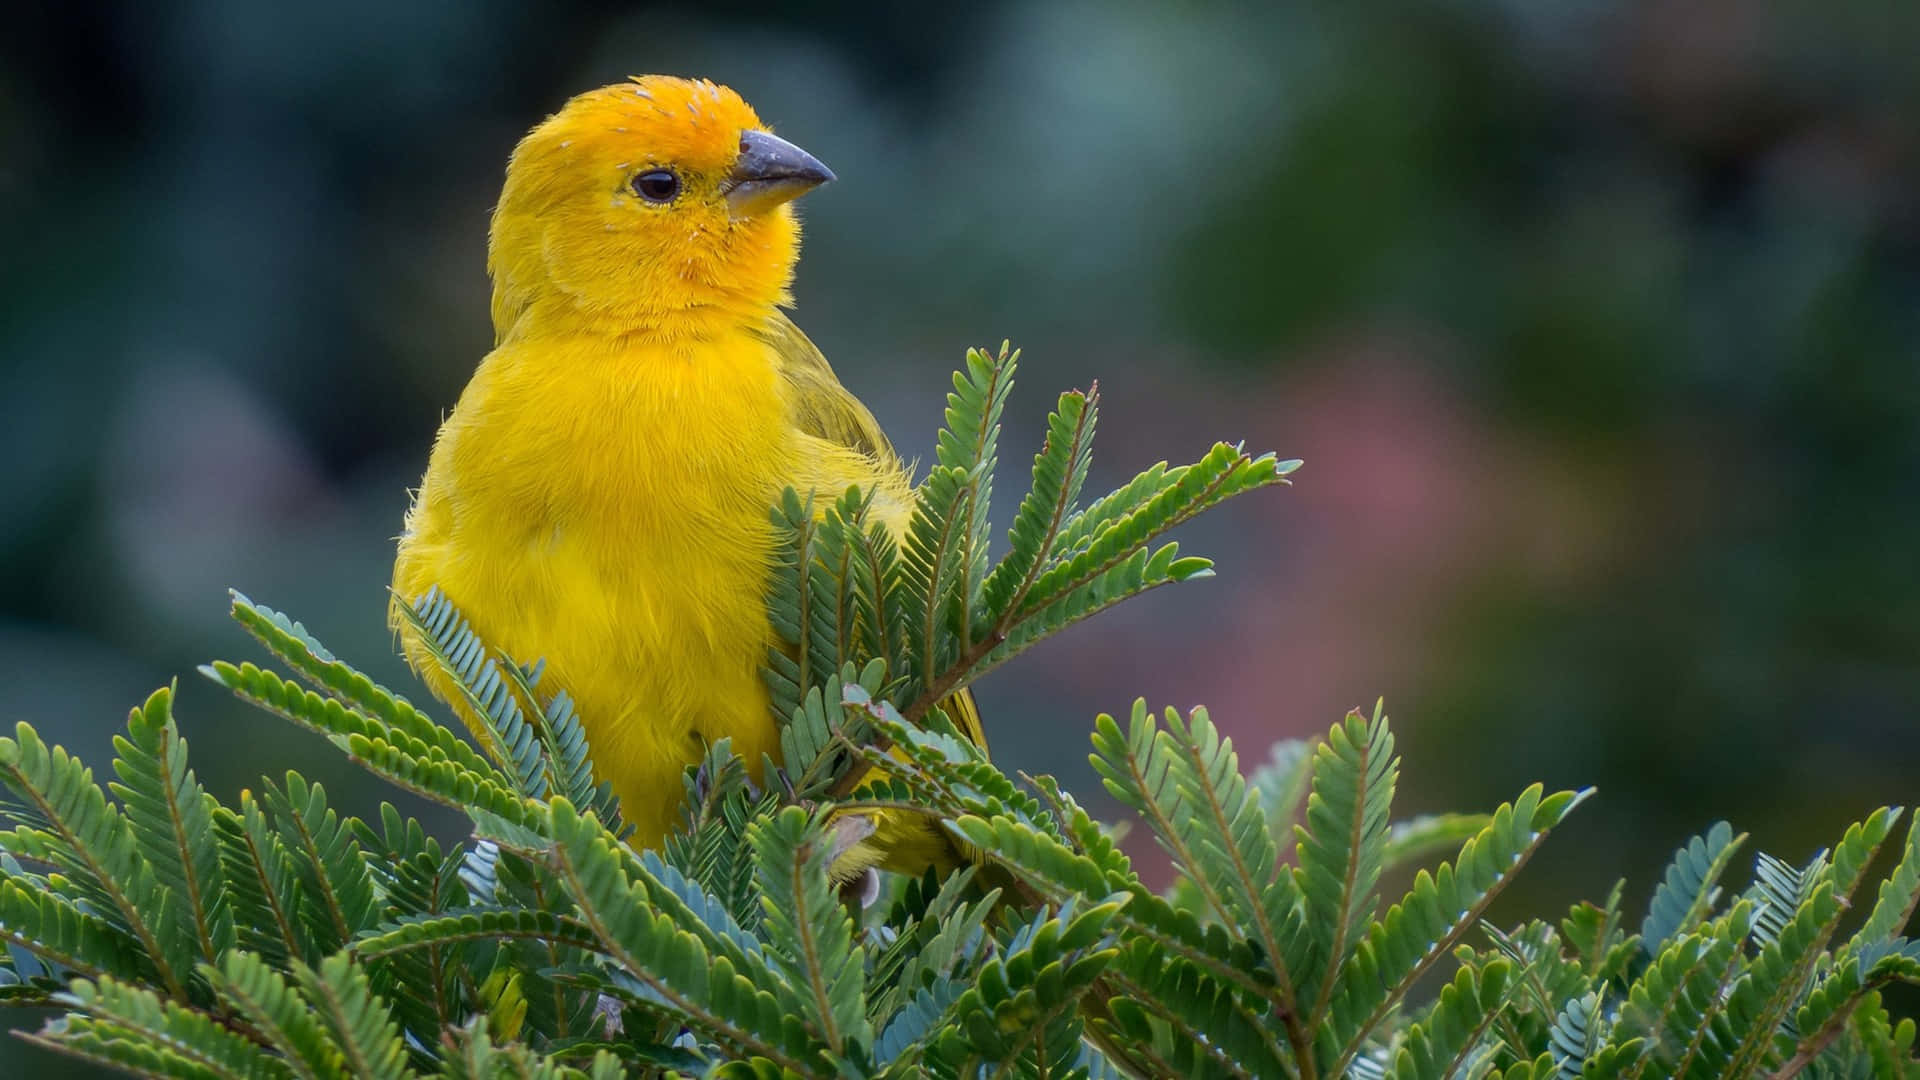 Hypnotic Beauty of the Yellow Warbler Wallpaper